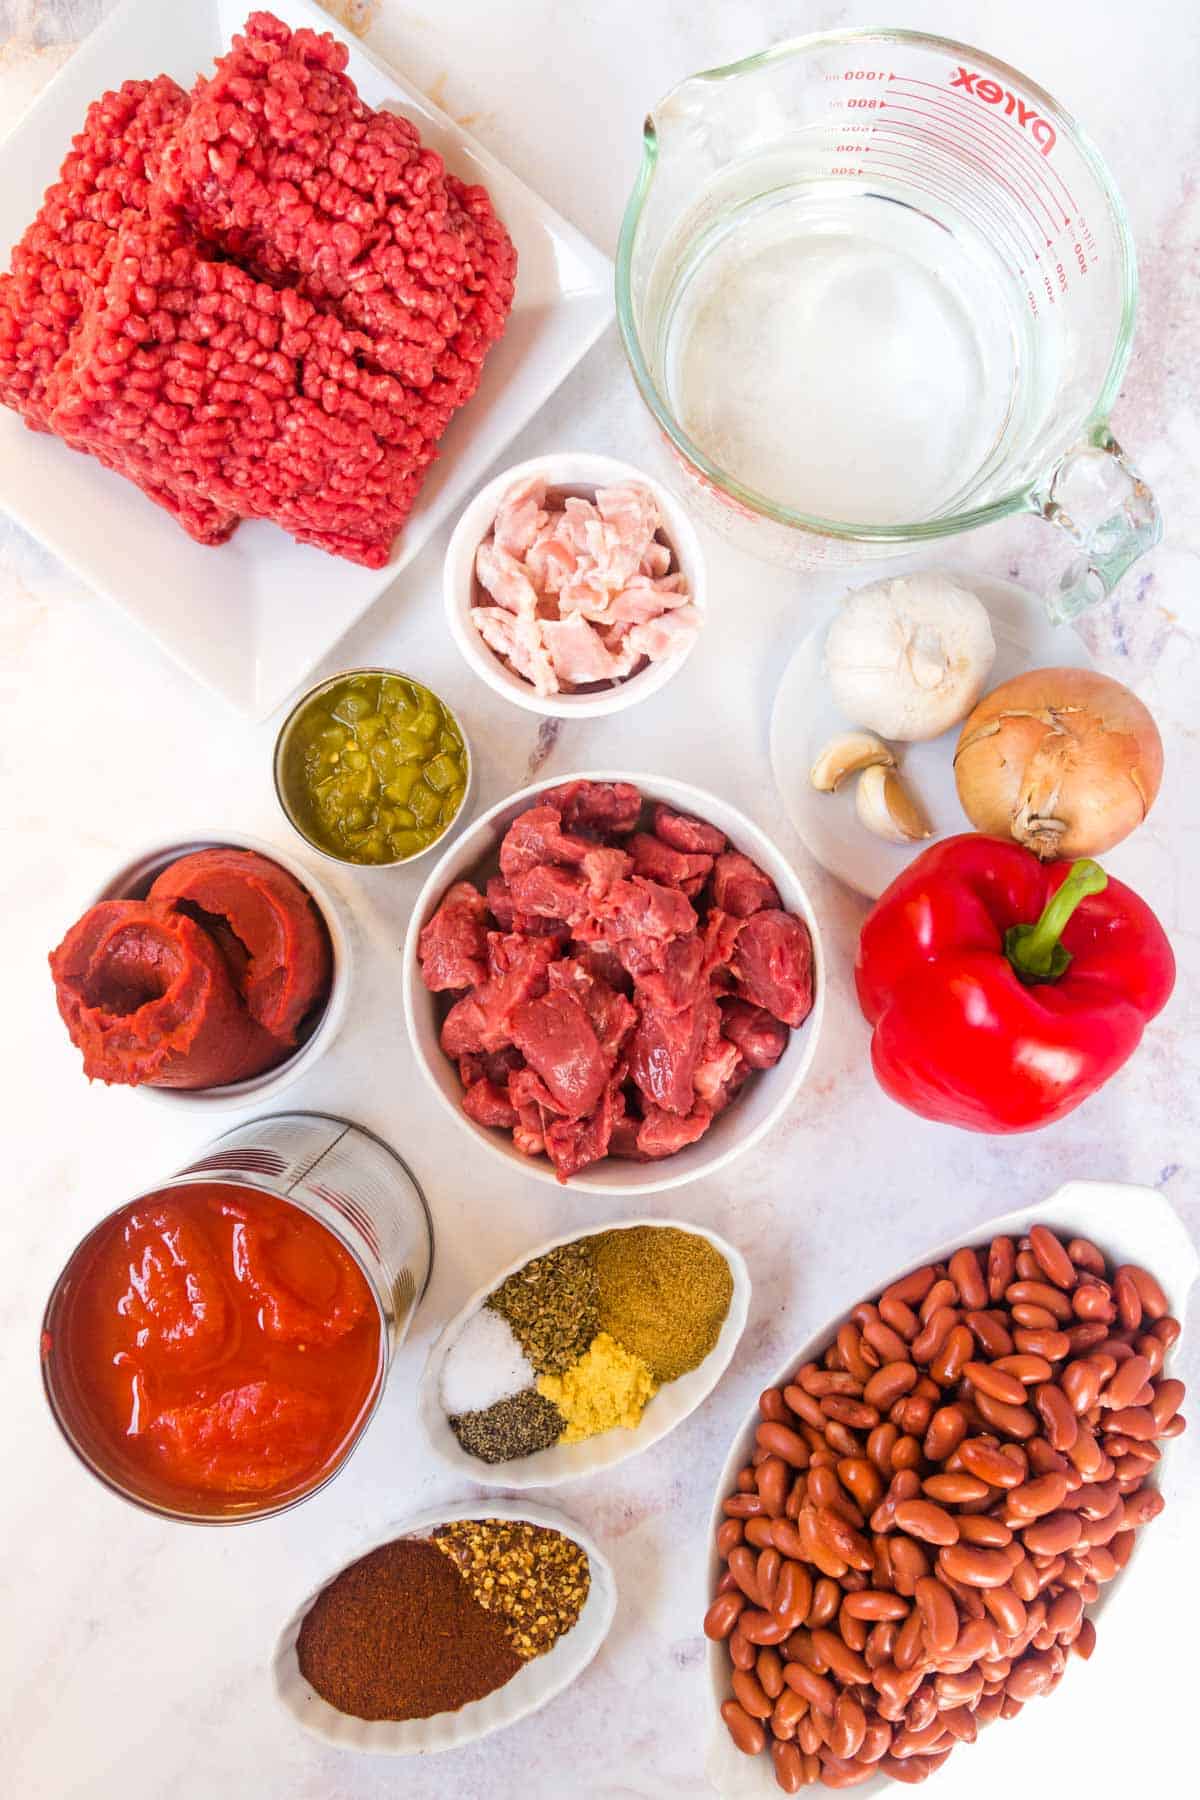 Ingredients for beef chili in white bowls, including beans, beef and veggies.